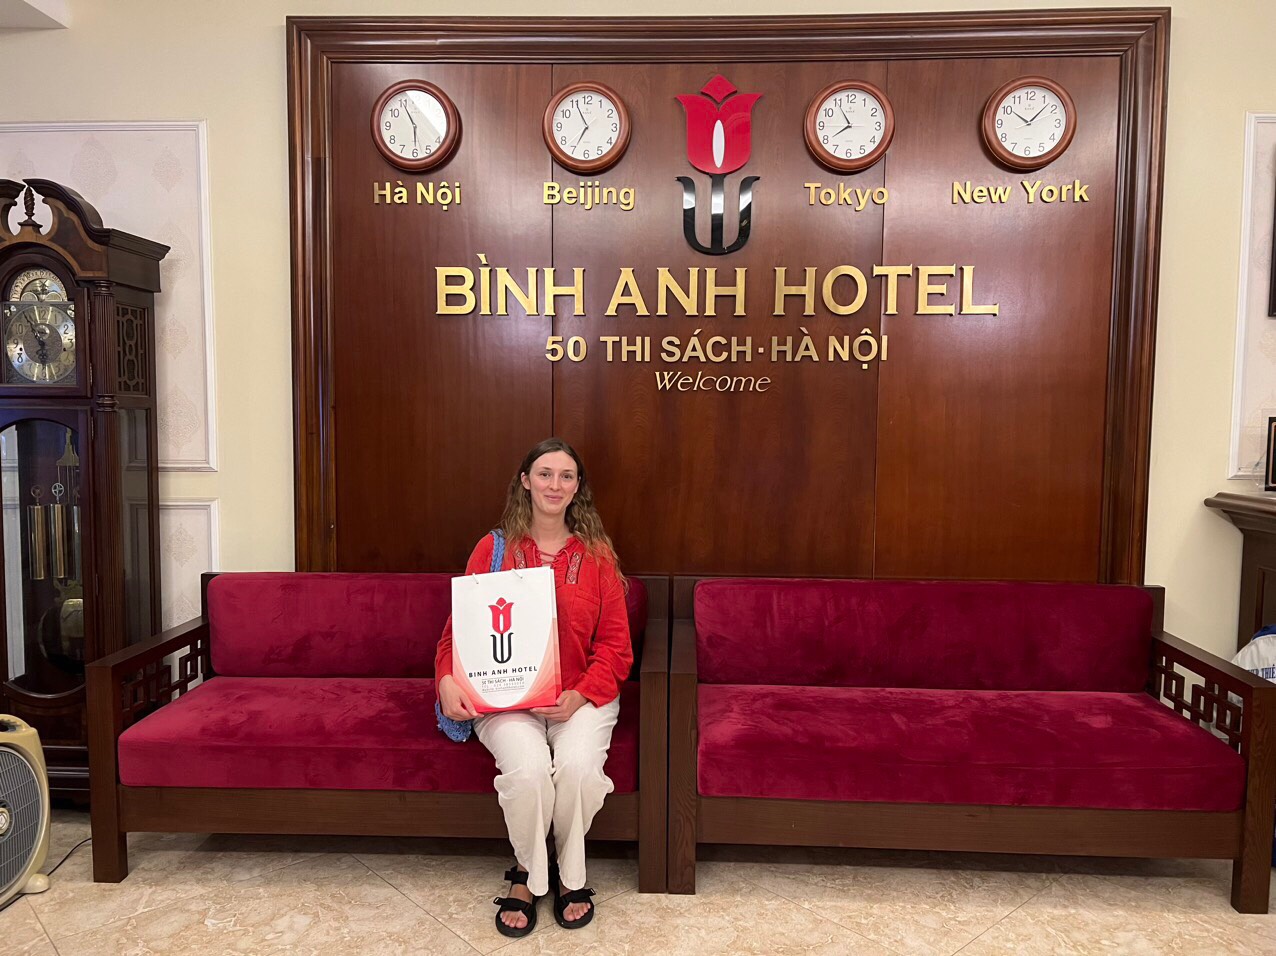 <p>I'm REICHERT ANIKA. I come from German. I booked 1 room at Binh Anh Hotel on  Agoda channel. It is clean and comfortable with good service!<br />
I traveled to Ha Giang and then came back to stay at Binh Anh Hotel</p>
